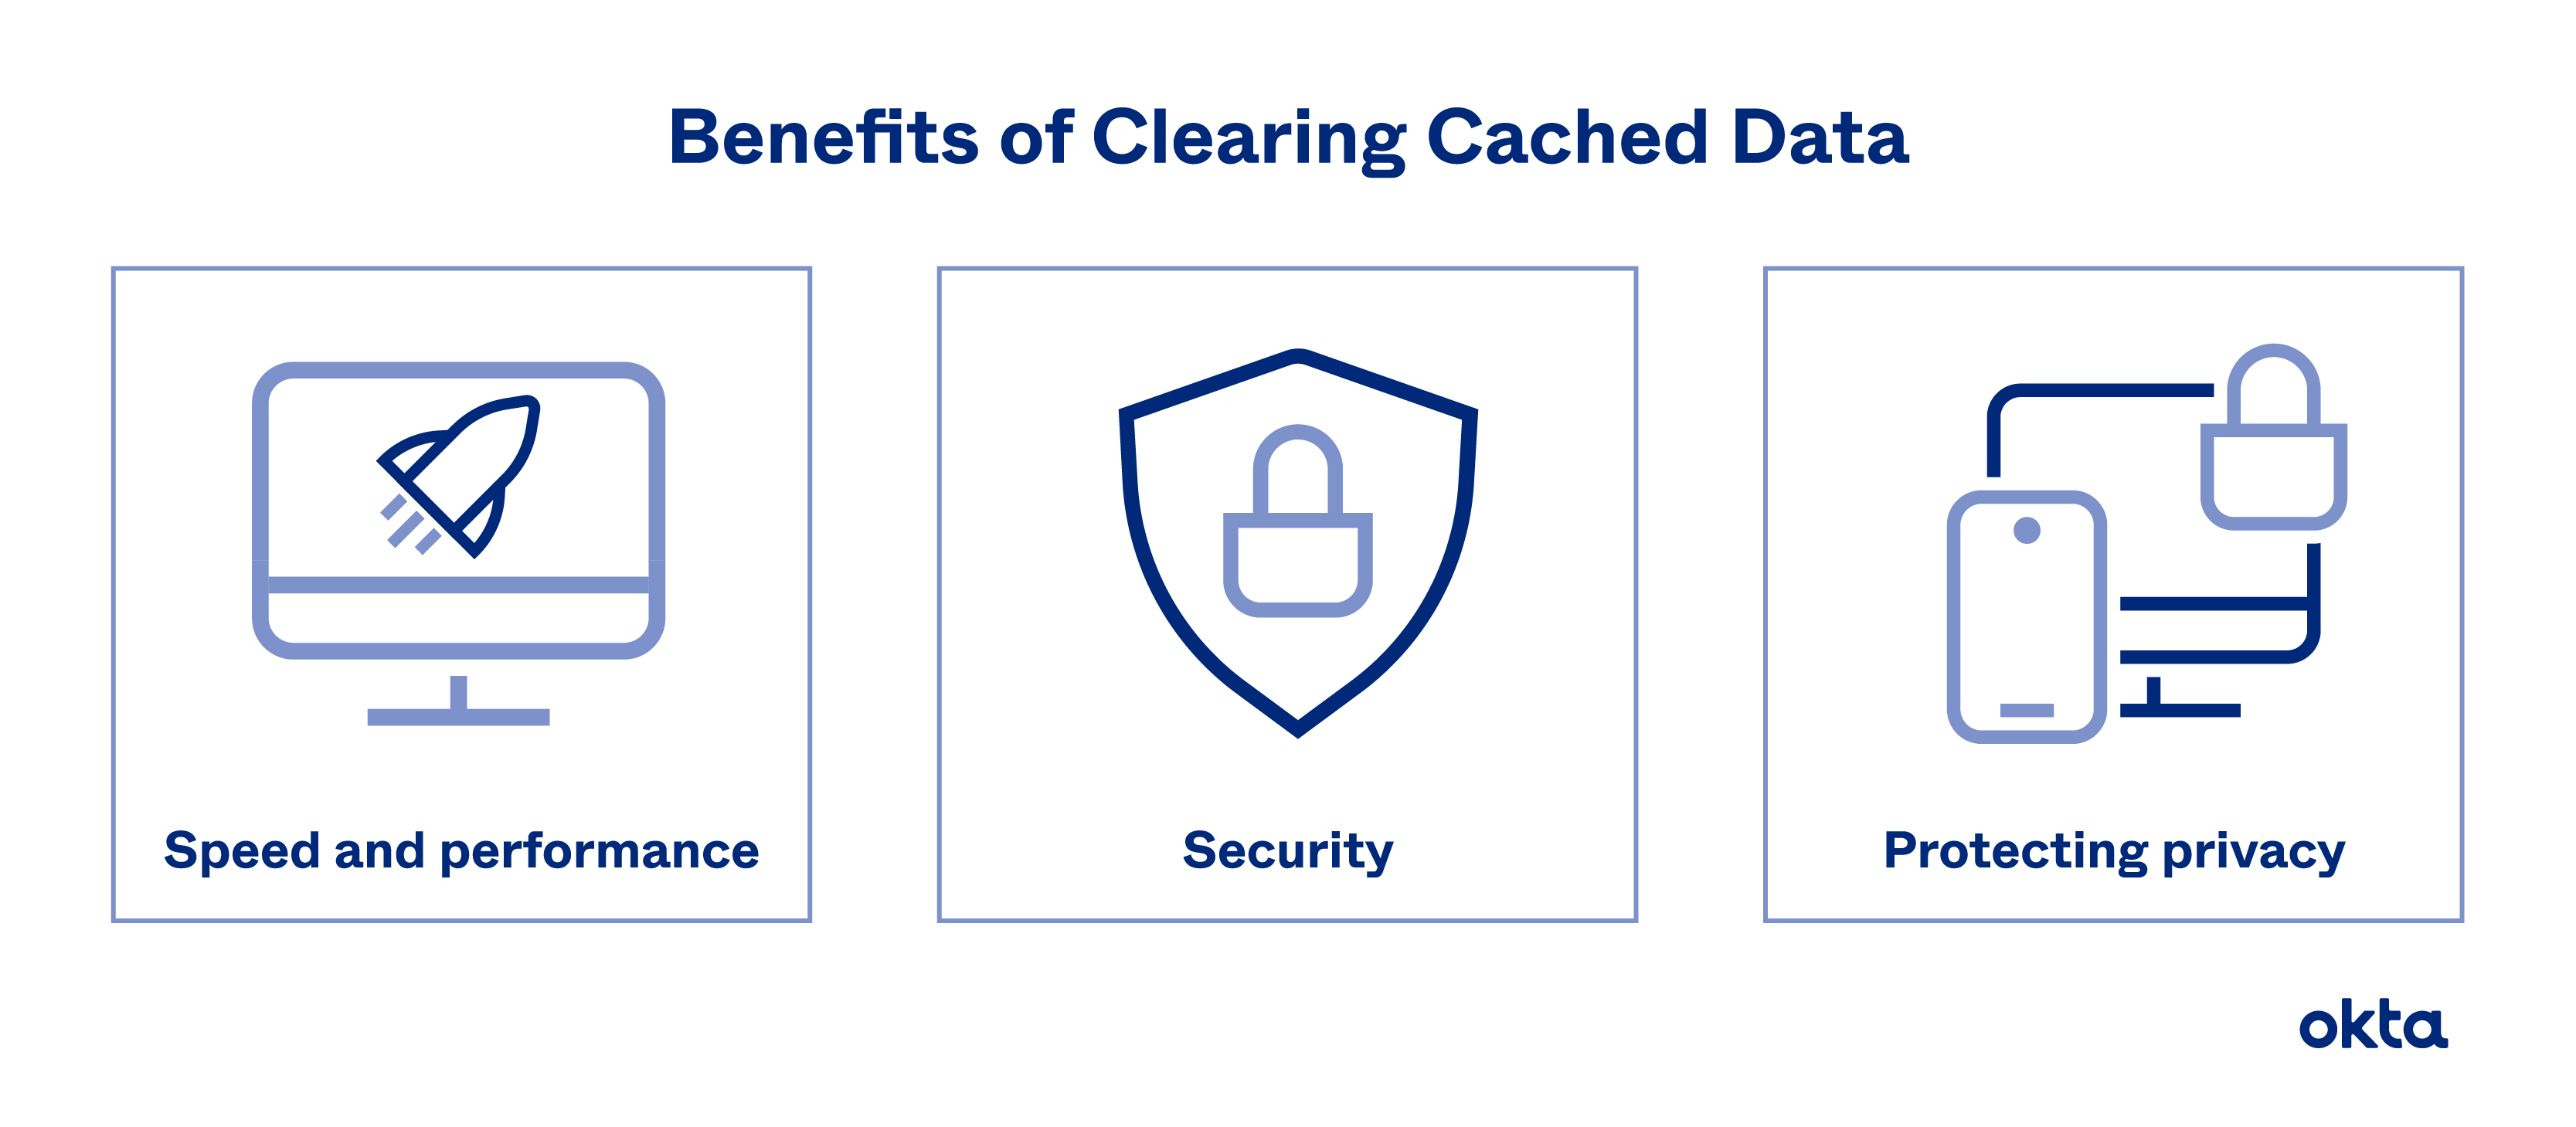 Benefits of Clearing Cached Data